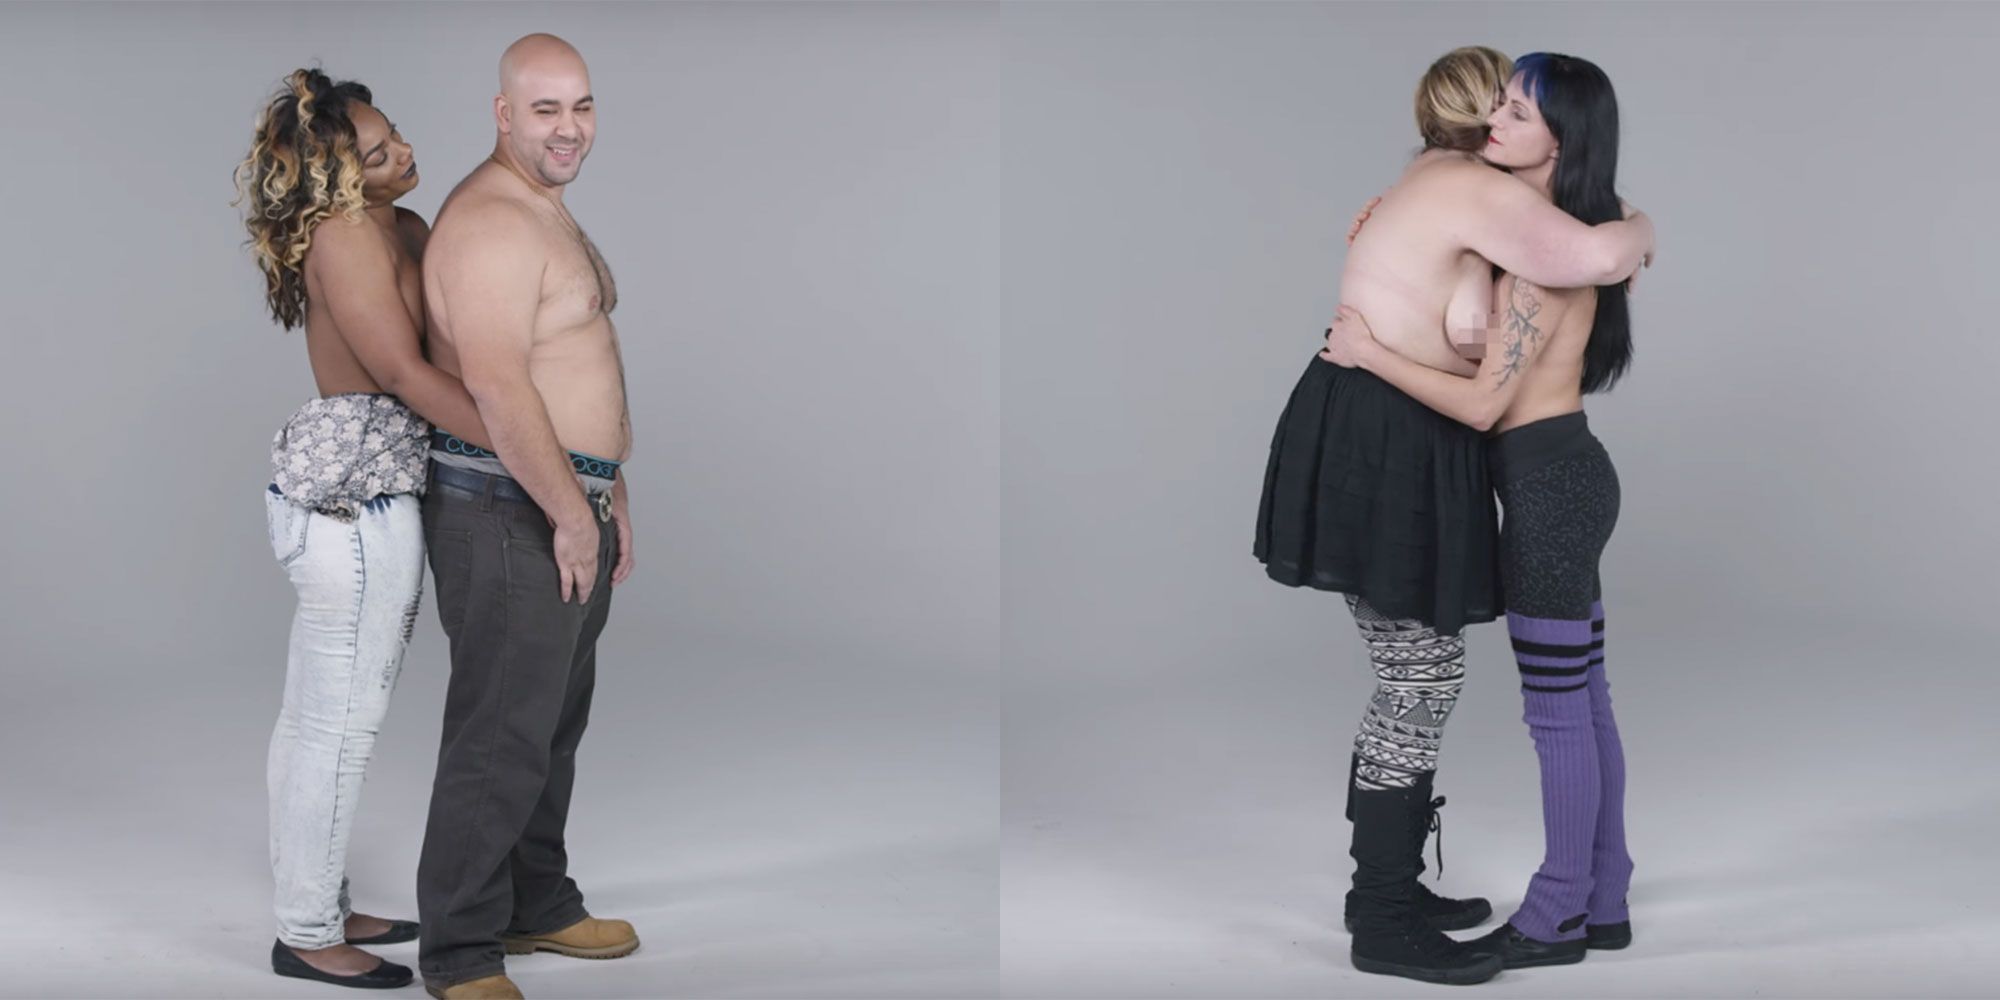 Watch Strangers Get Naked and Hug Each Other in the Name of Stress Relief photo